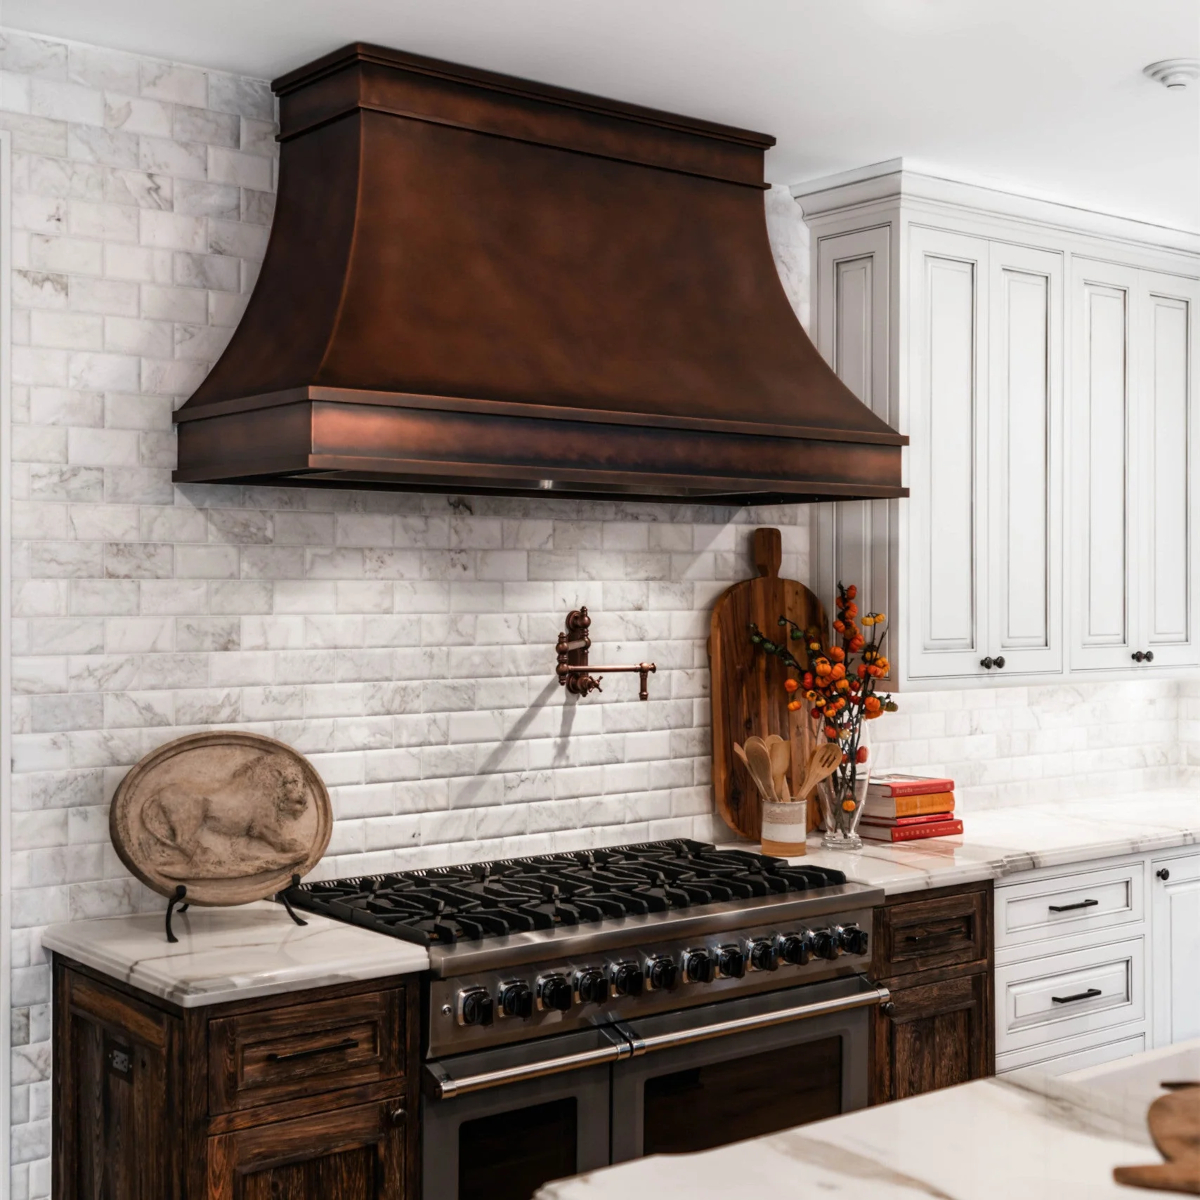 A rubbed copper oven range hood in a white and copper themed kitchen.